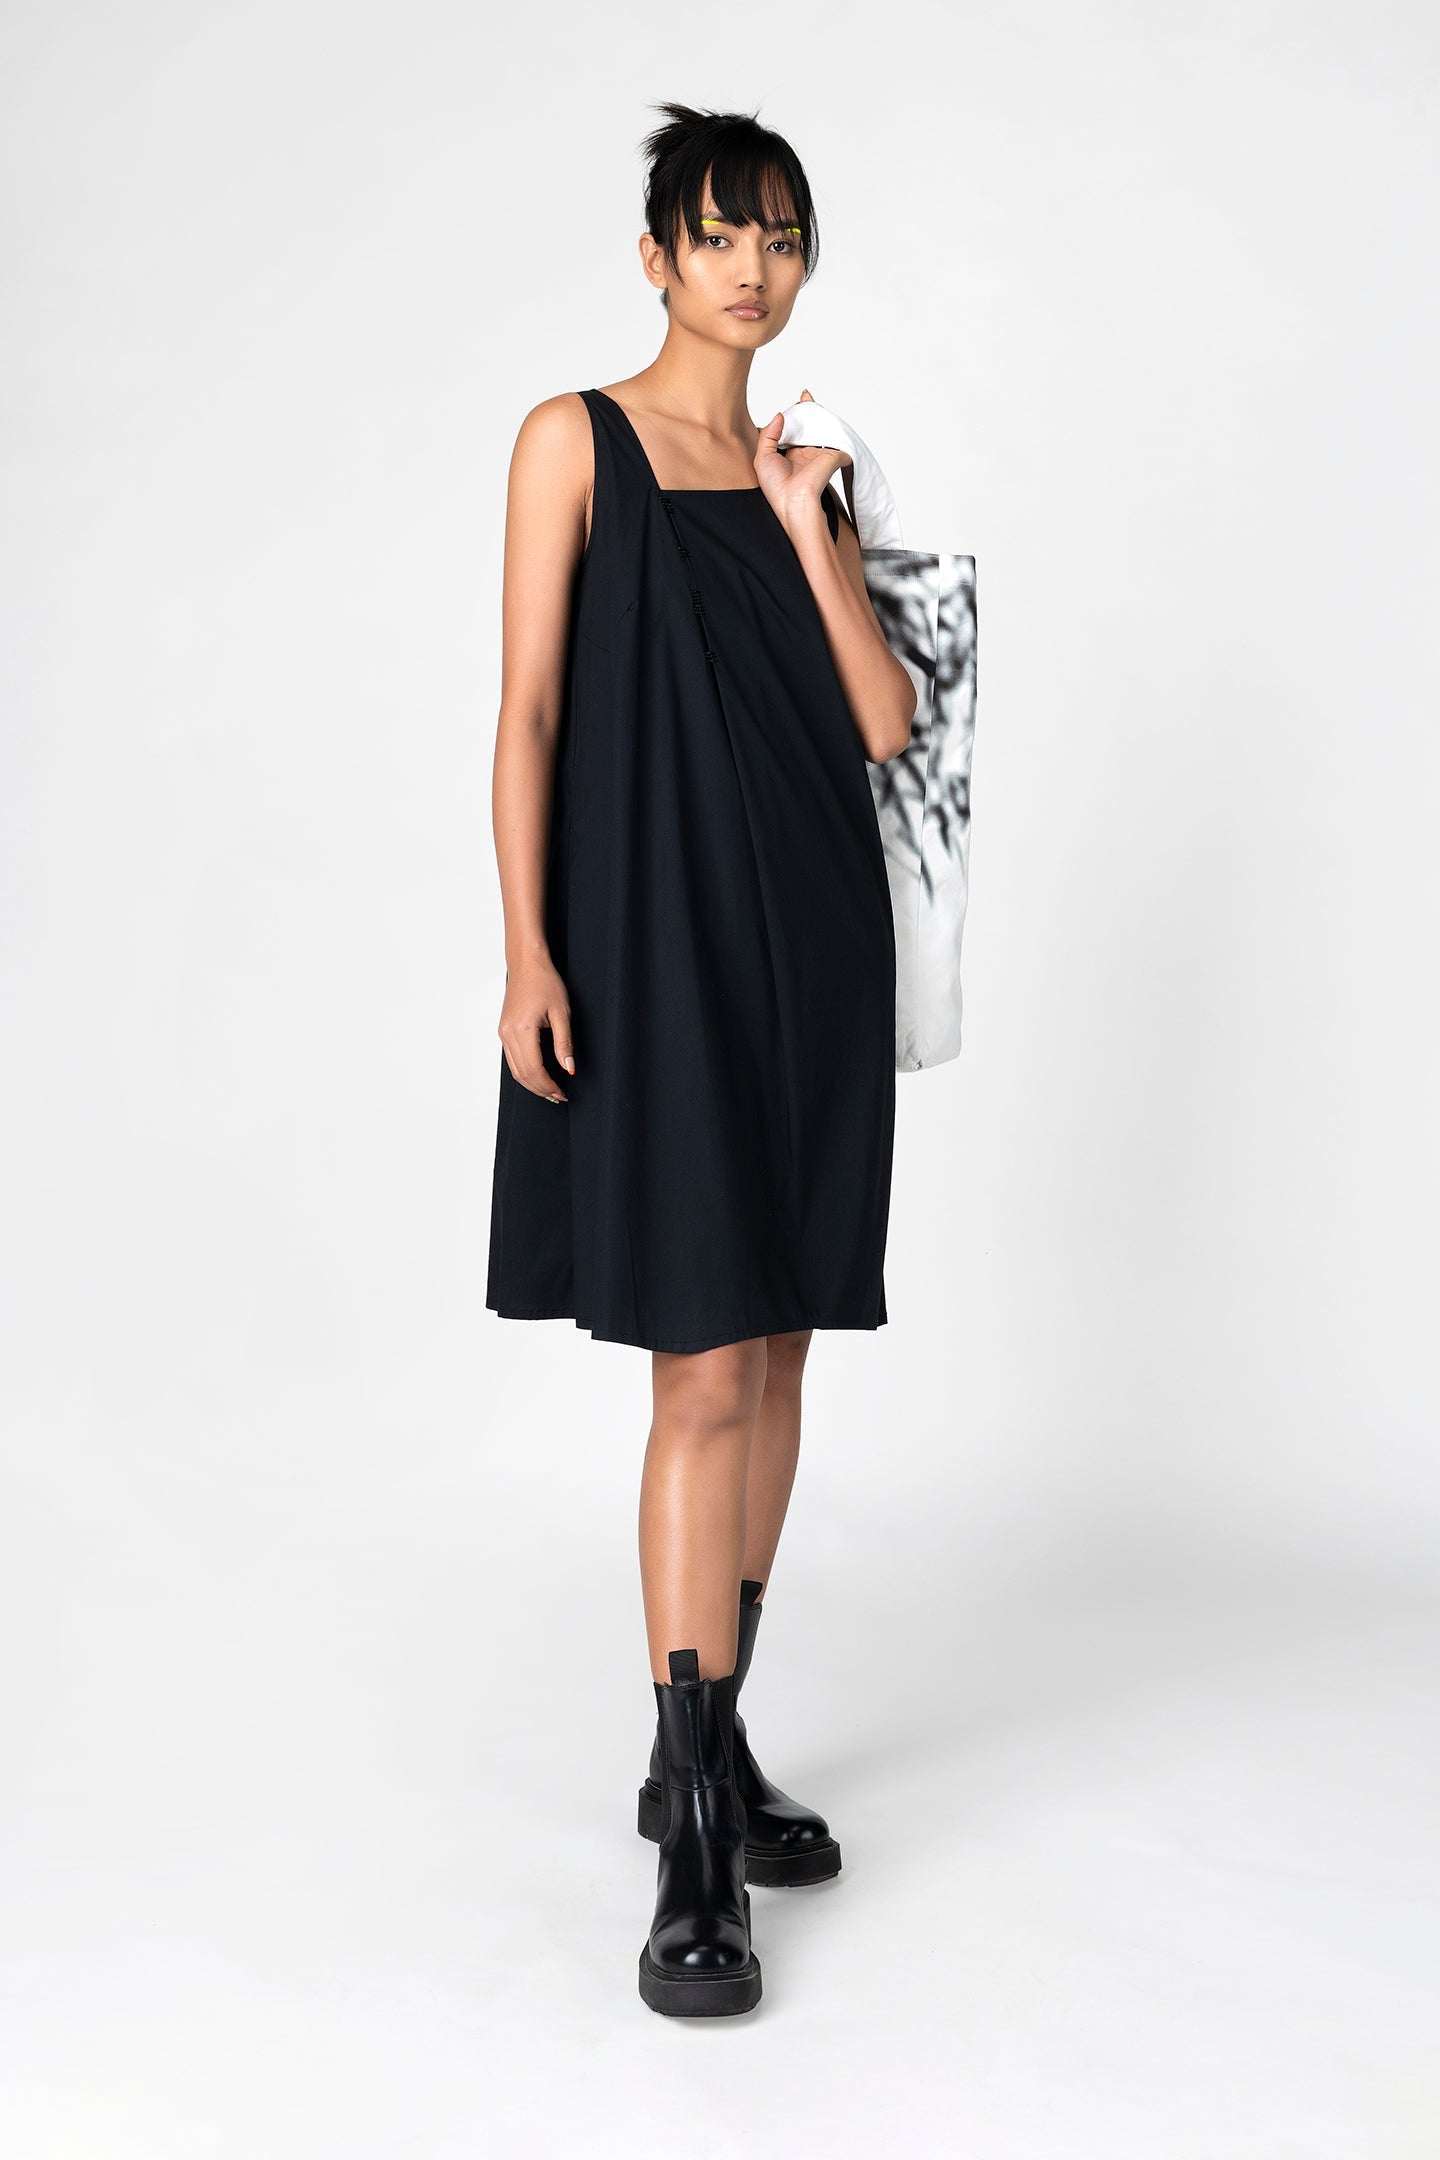 embroidered-draped-dress - Genes online store 2020